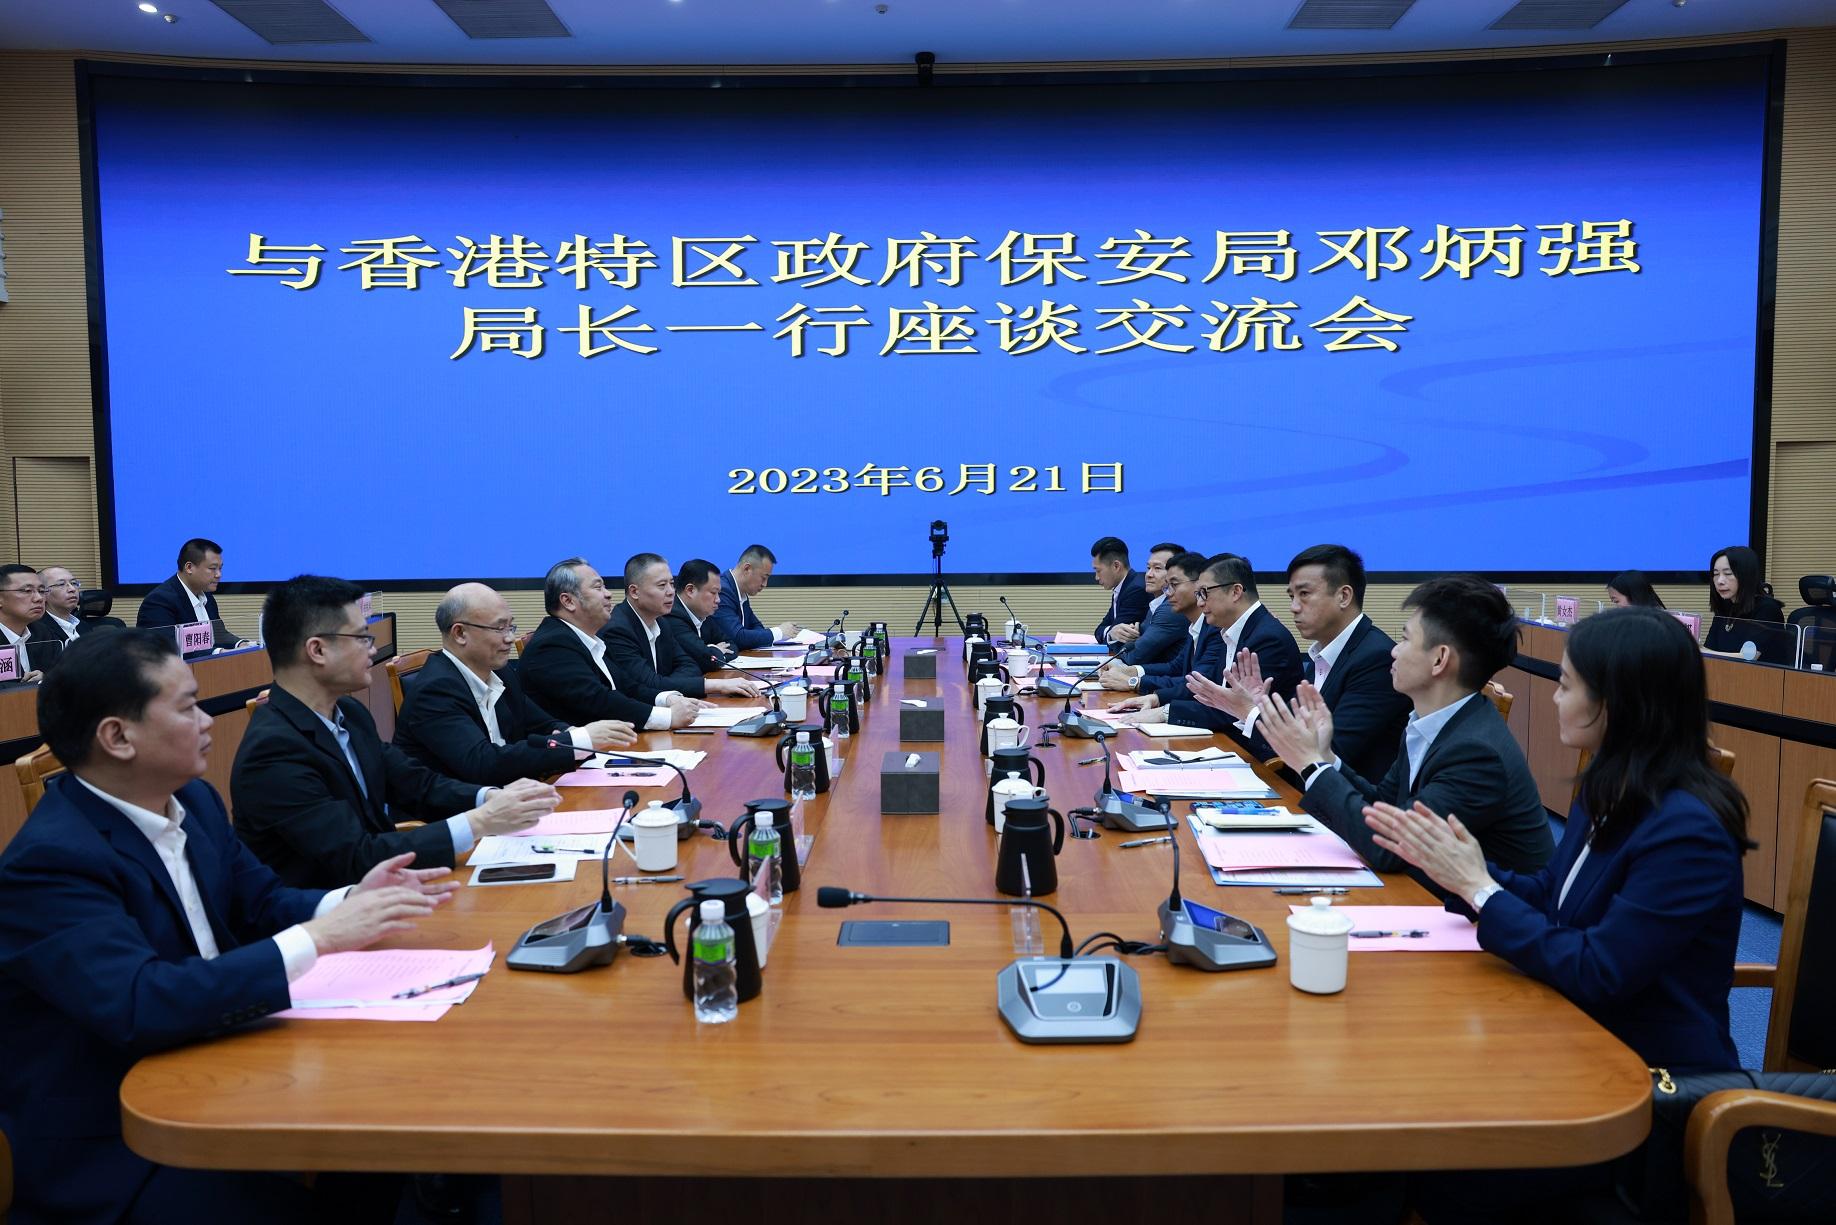 The Secretary for Security, Mr Tang Ping-keung, visited Zhuhai and Jiangmen today (June 21) to continue his visit to the Guangdong-Hong Kong-Macao Greater Bay Area. Photo shows Mr Tang (fourth right) meeting with the Jiangmen Municipal Public Security Bureau.